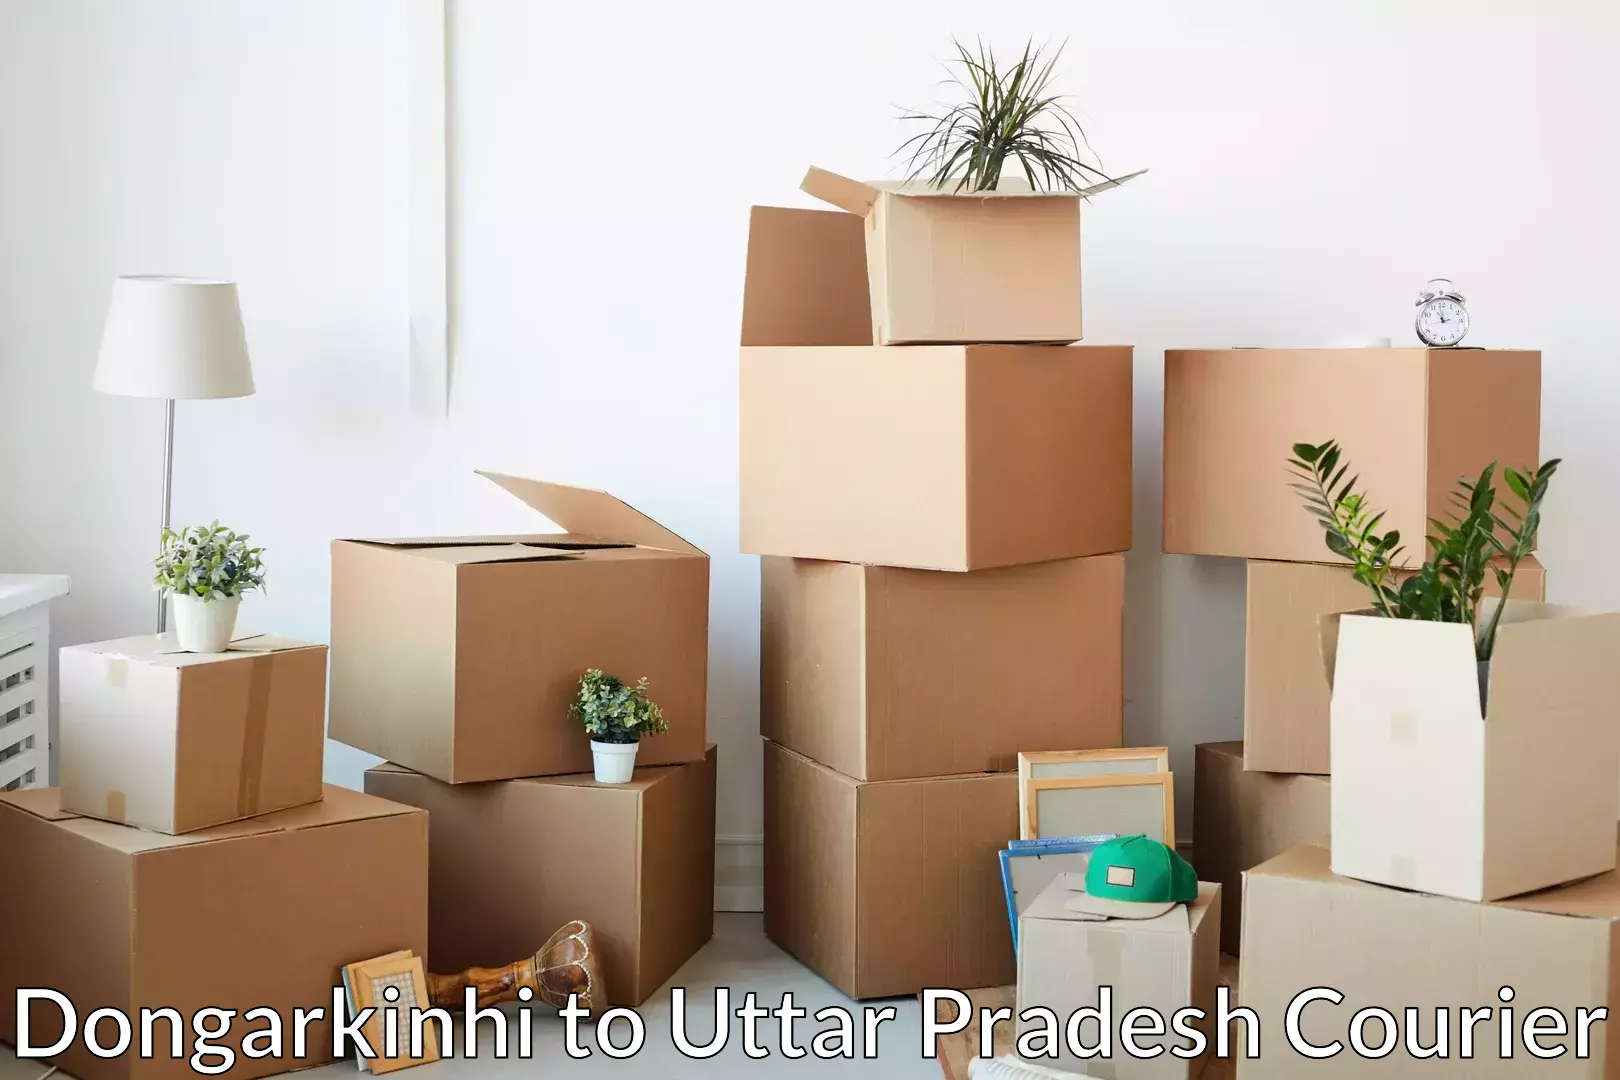 Cost-effective moving options Dongarkinhi to Chhata